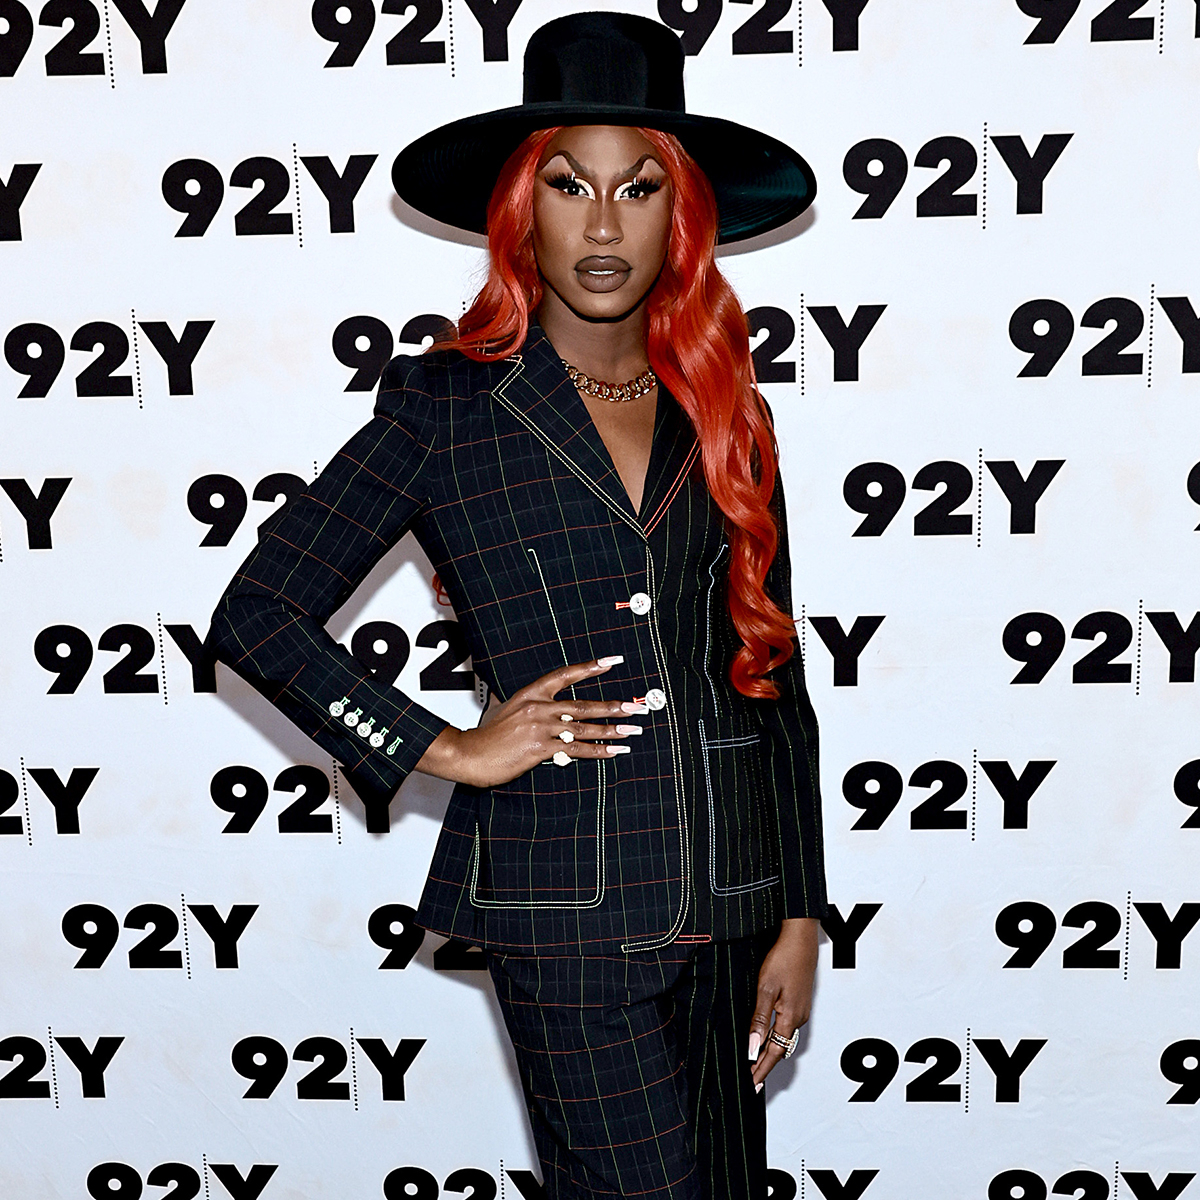 How RuPaul's Drag Race's Shea Couleé Is Shaking Up the MCU